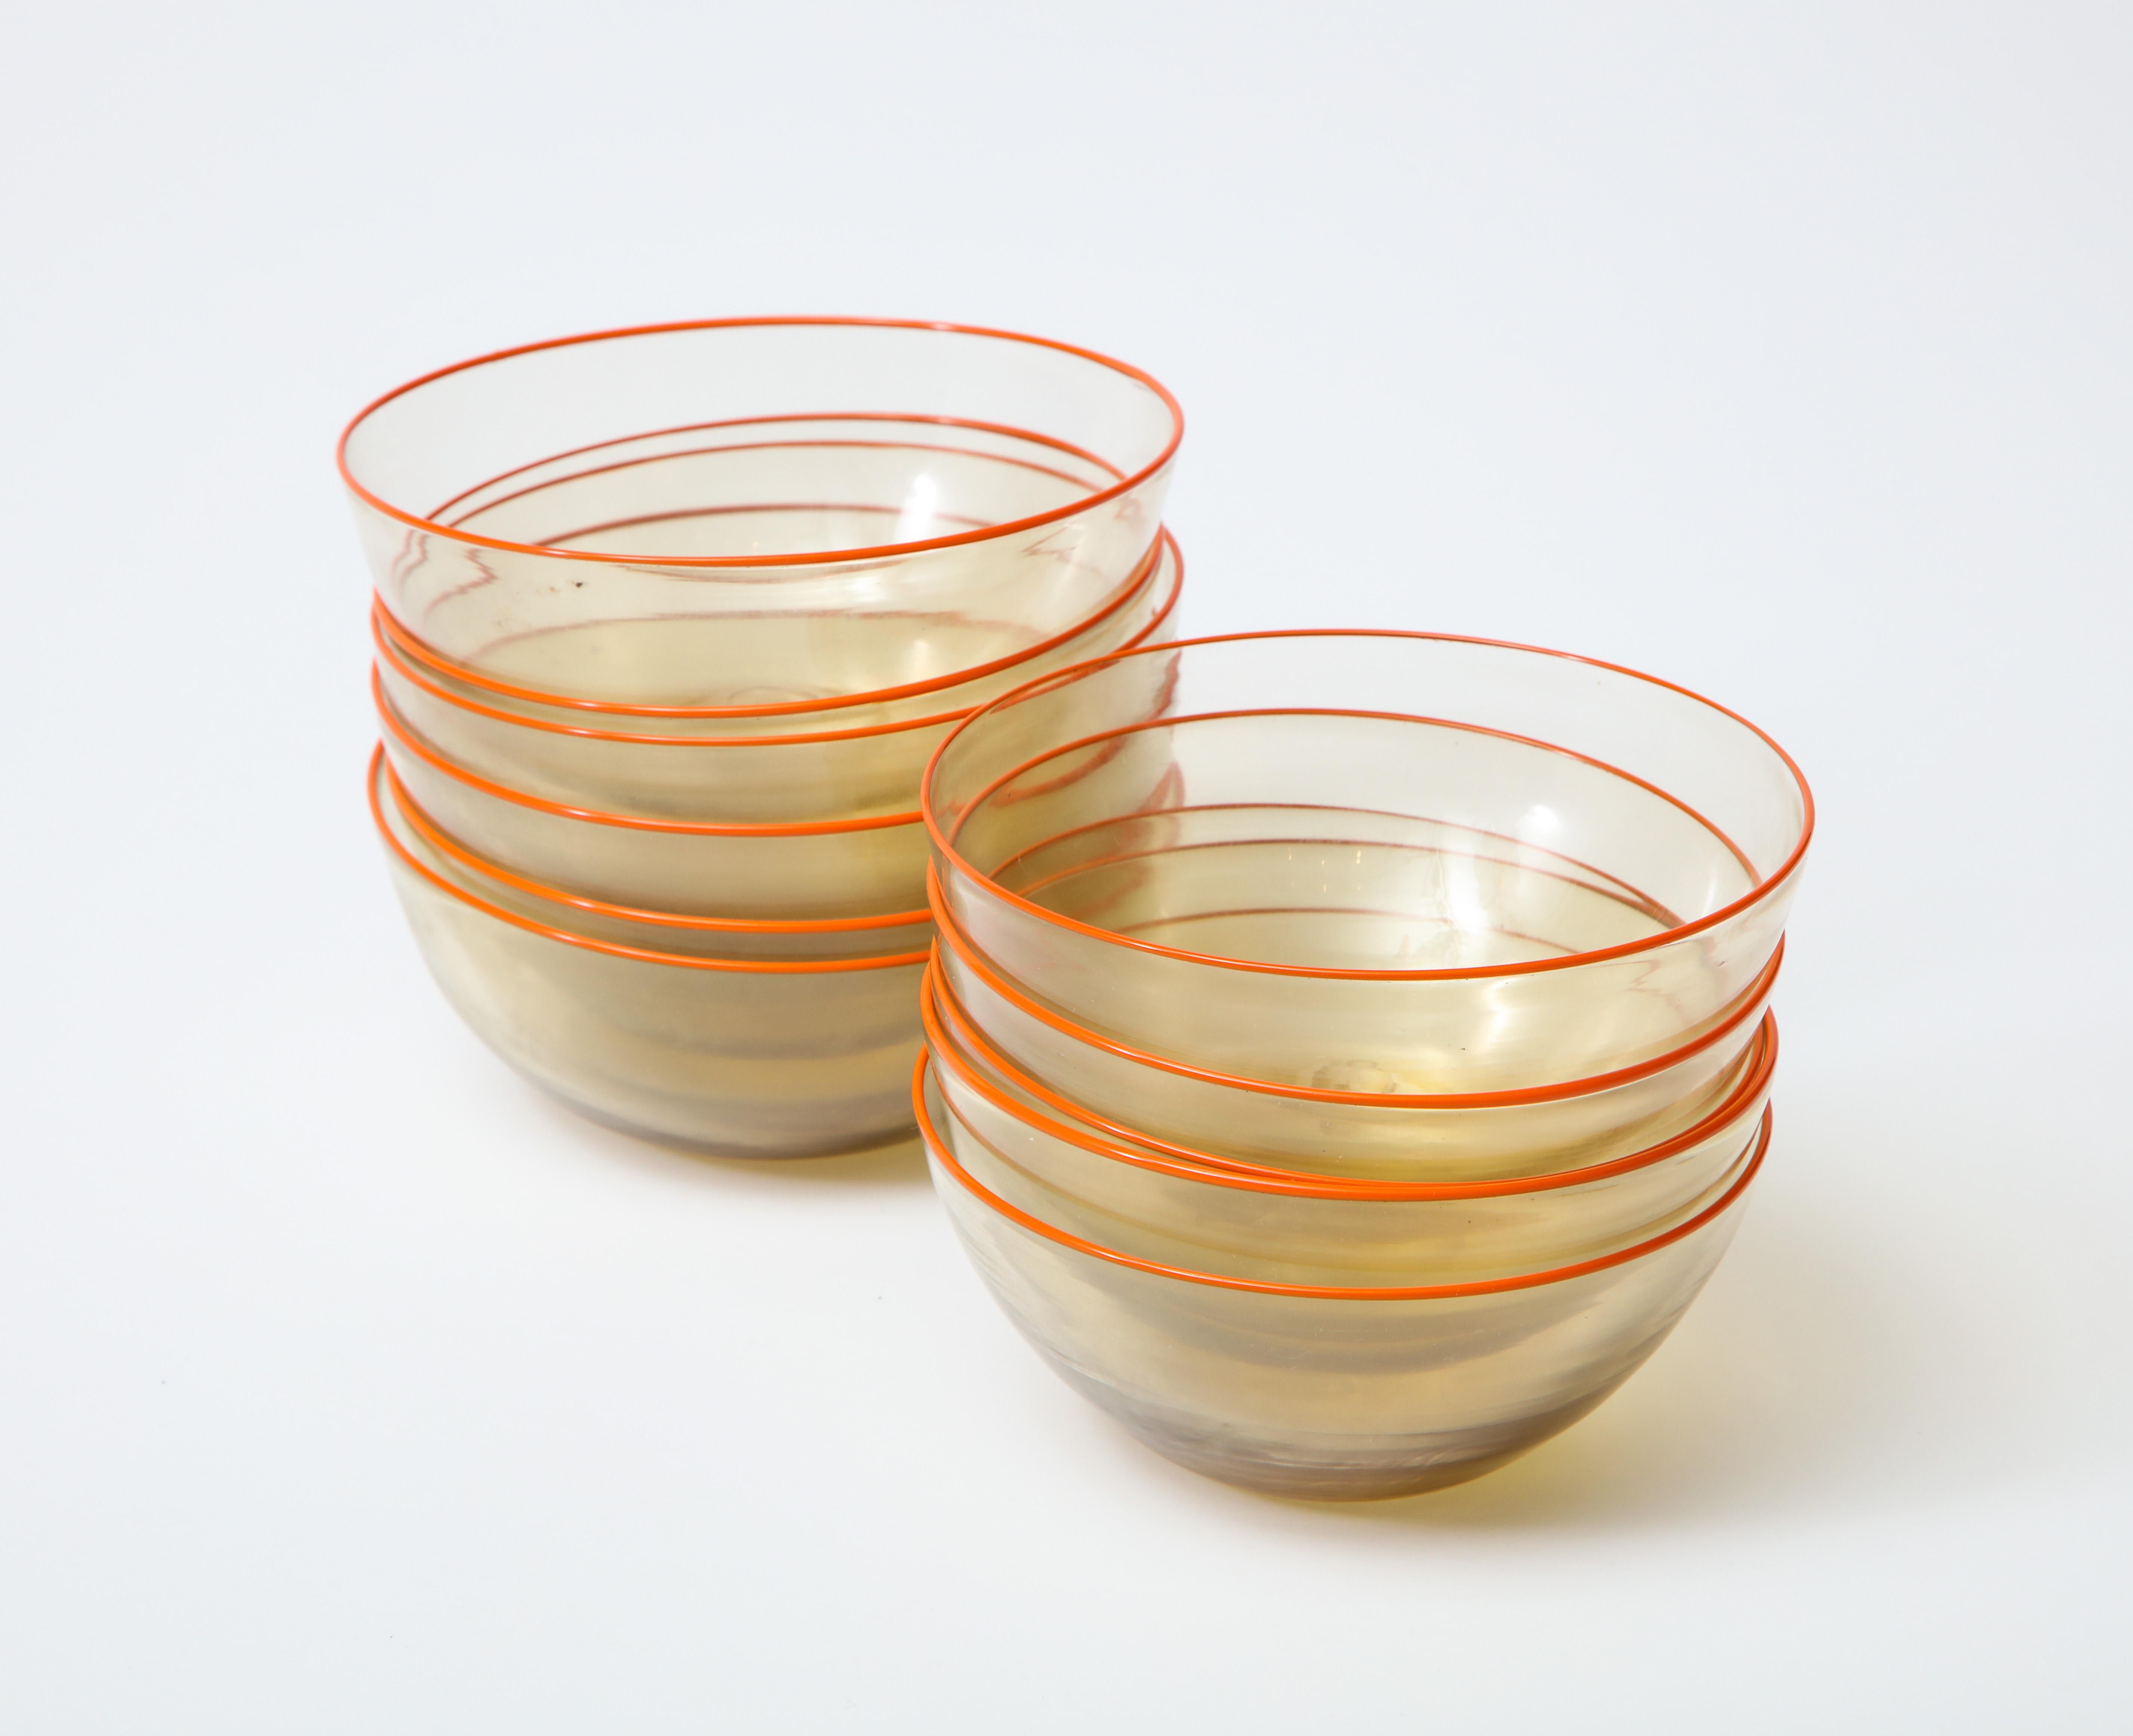 A set of 11 clear hand blown Murano glass bowls with orange rims. Delicate, classic midcentury look.